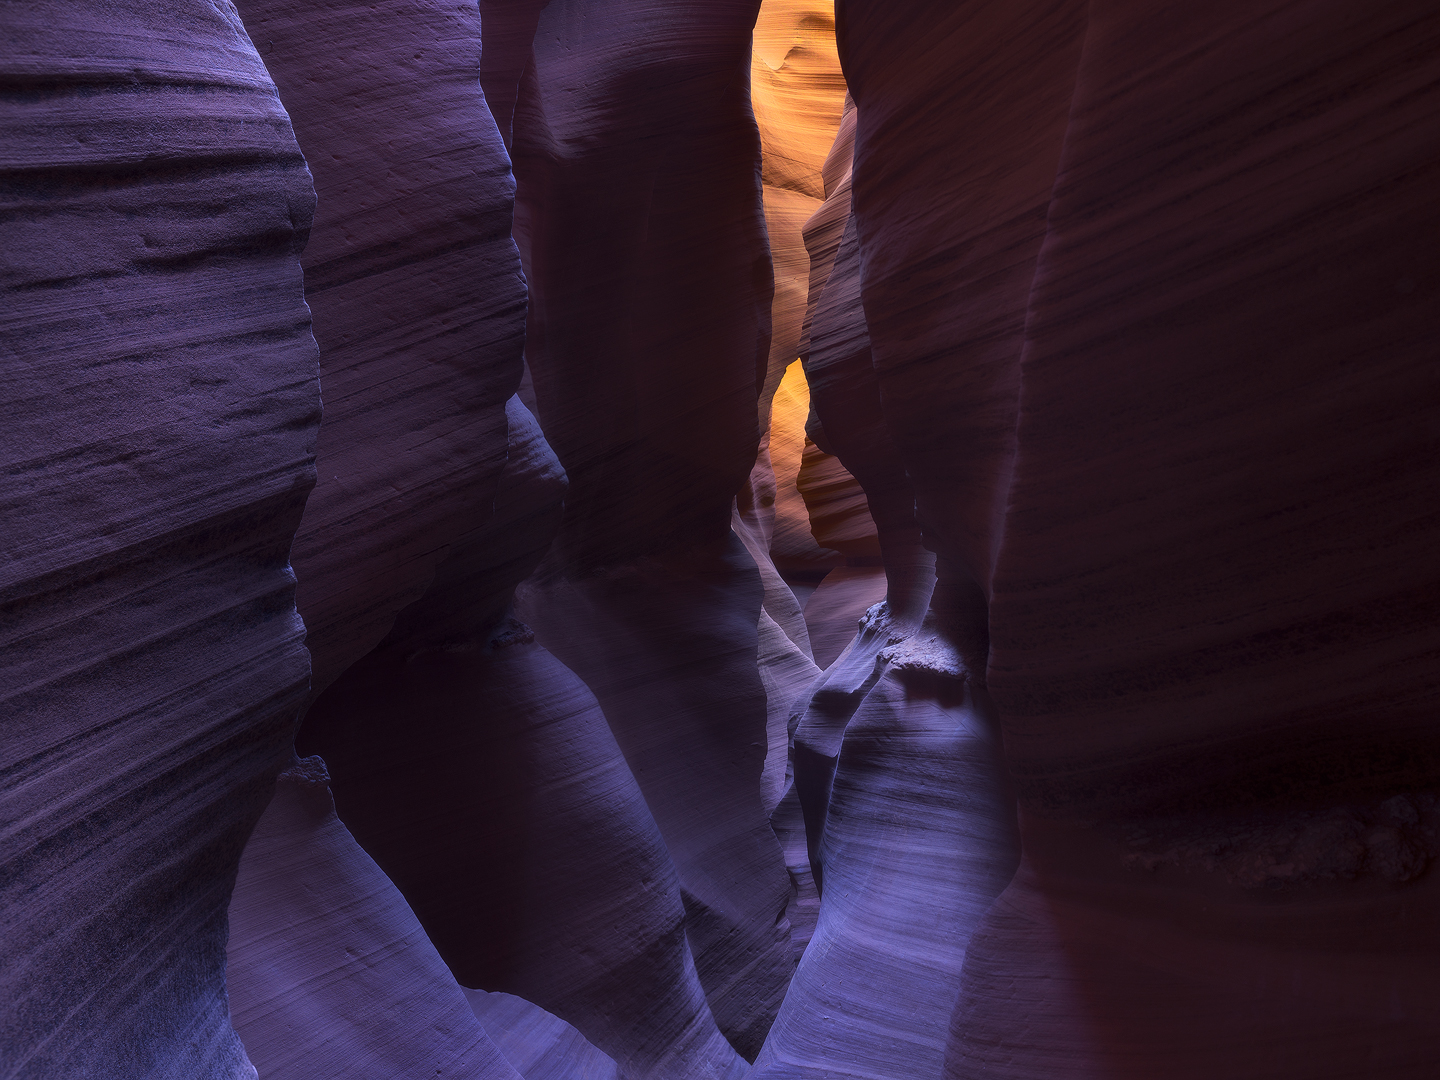 Sandstone, slot canyons, glow, reflected light, canyons, deserts, red